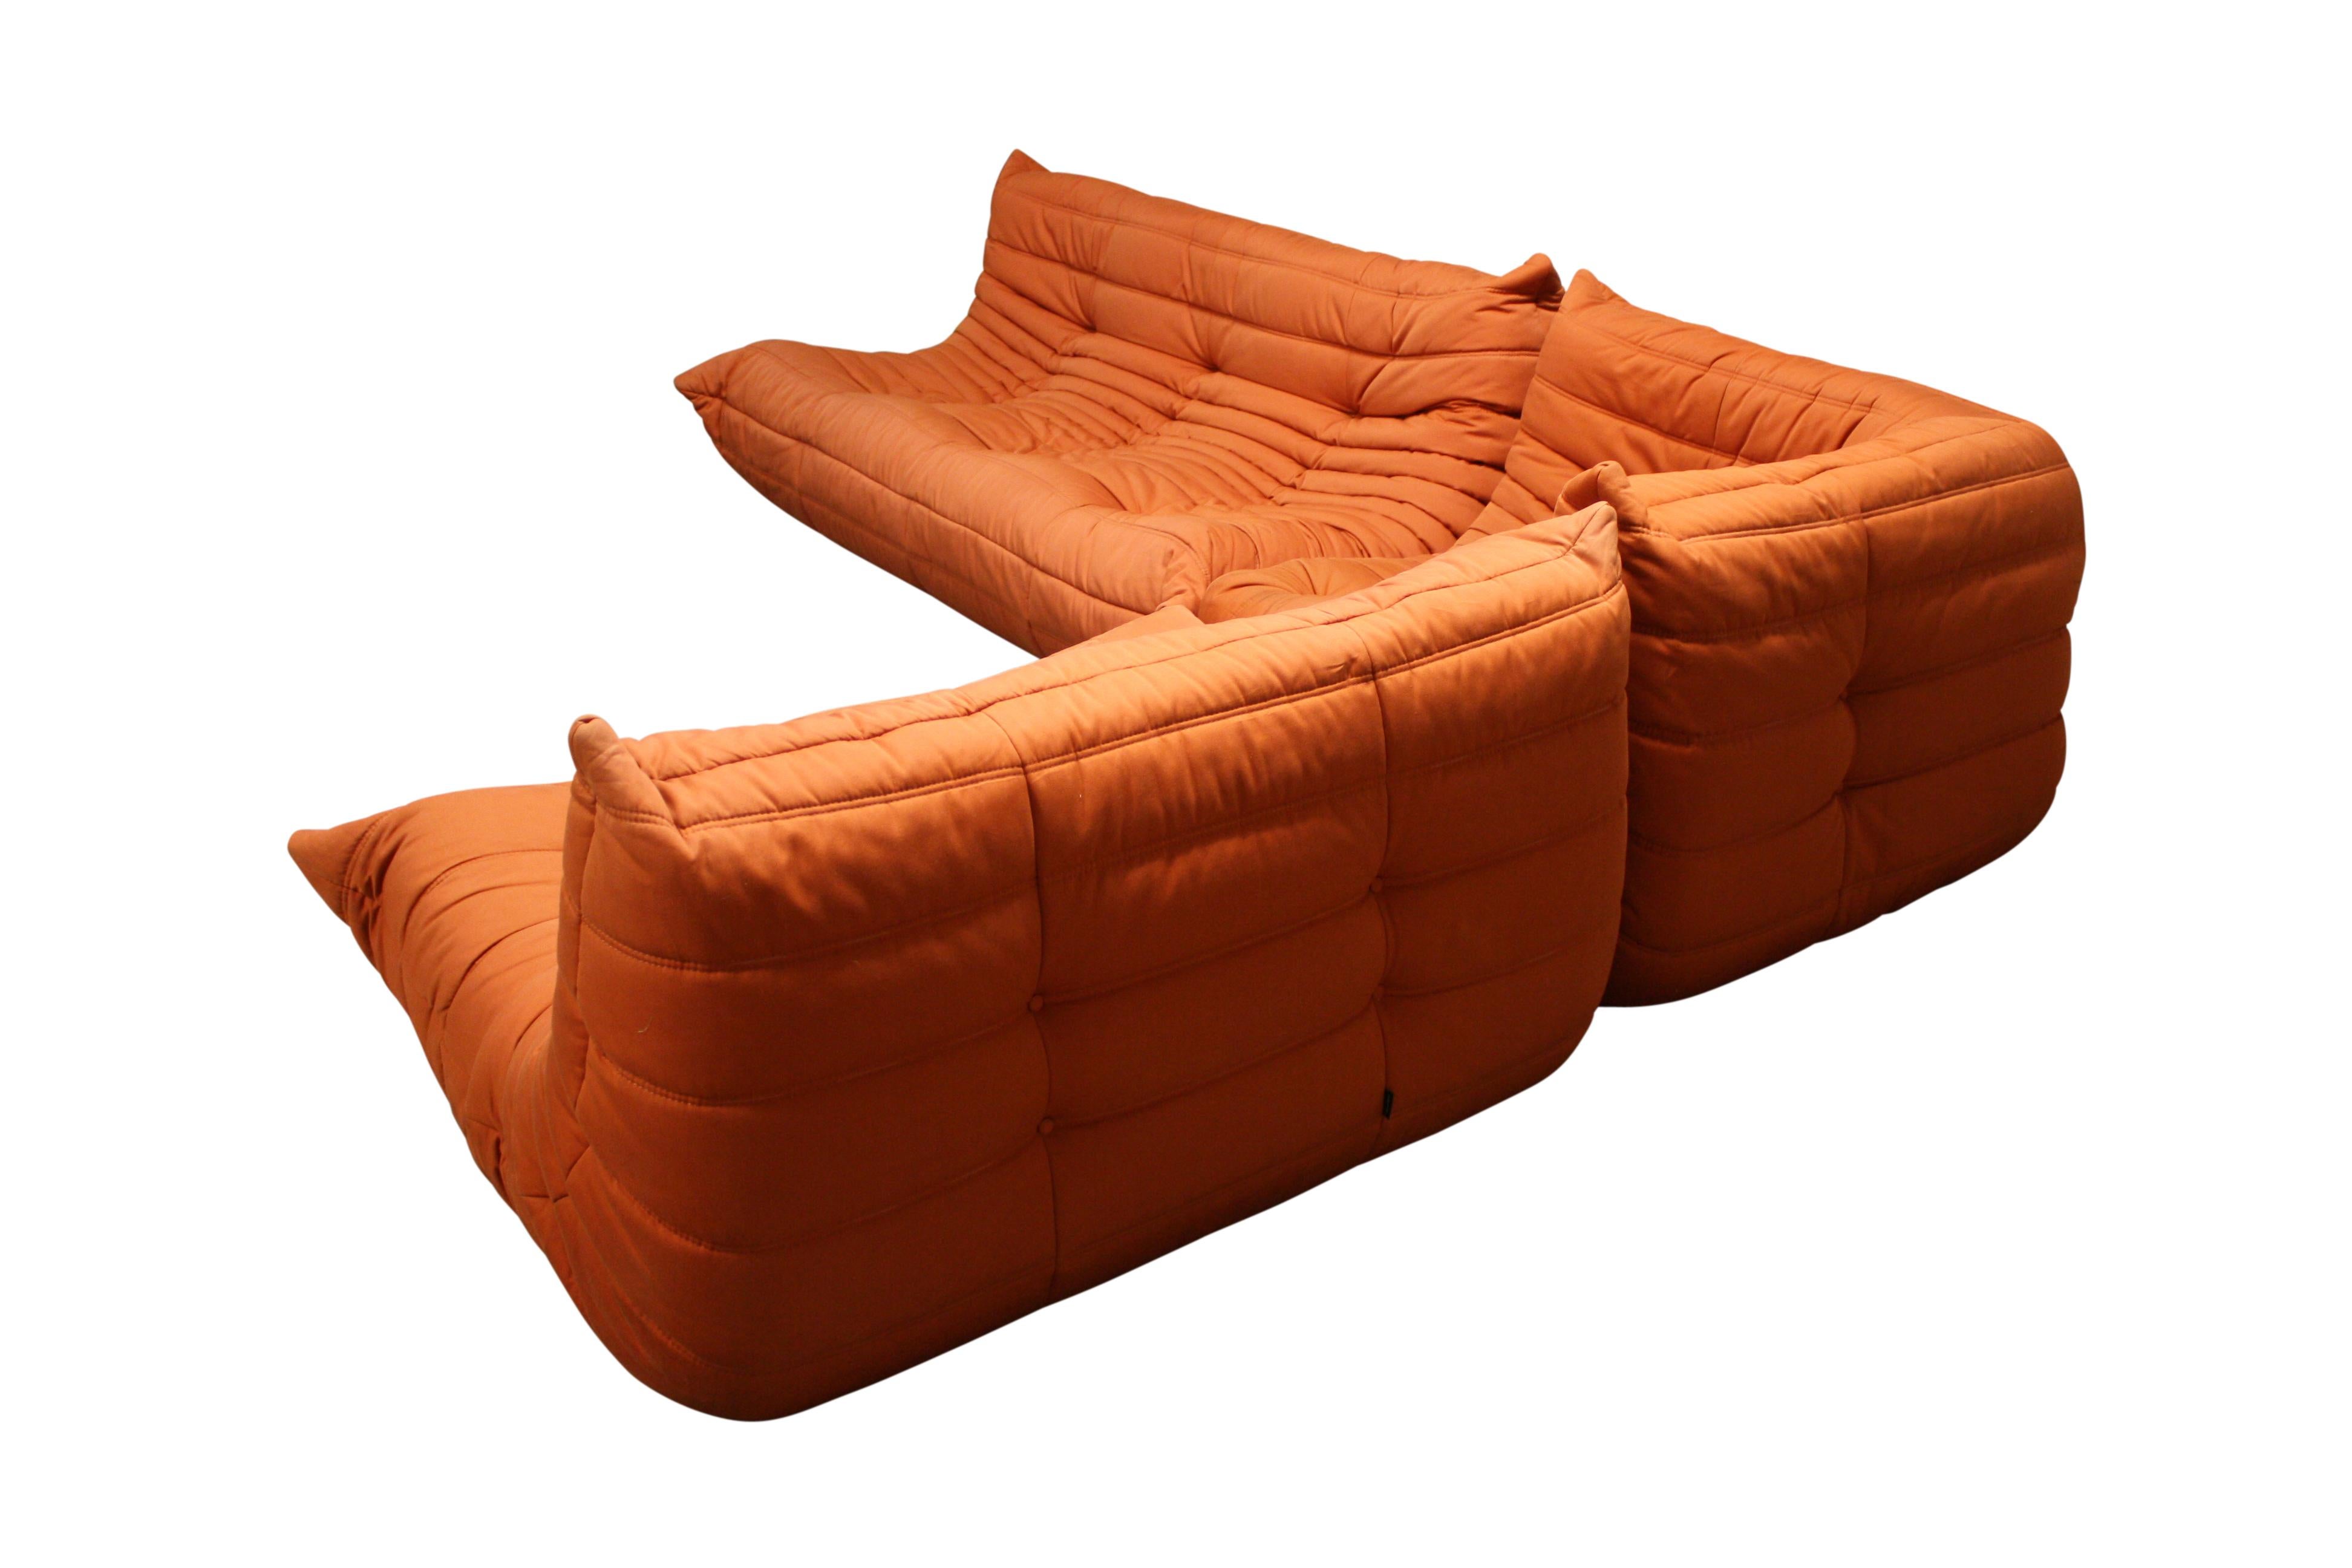 The iconic Togo sofa, originally designed by Michael Ducaroy for Ligne Roset in 1973, has become a design classic. 

This three-piece modular set is incredibly versatile and can be configured into one corner sofa or split for a multitude of